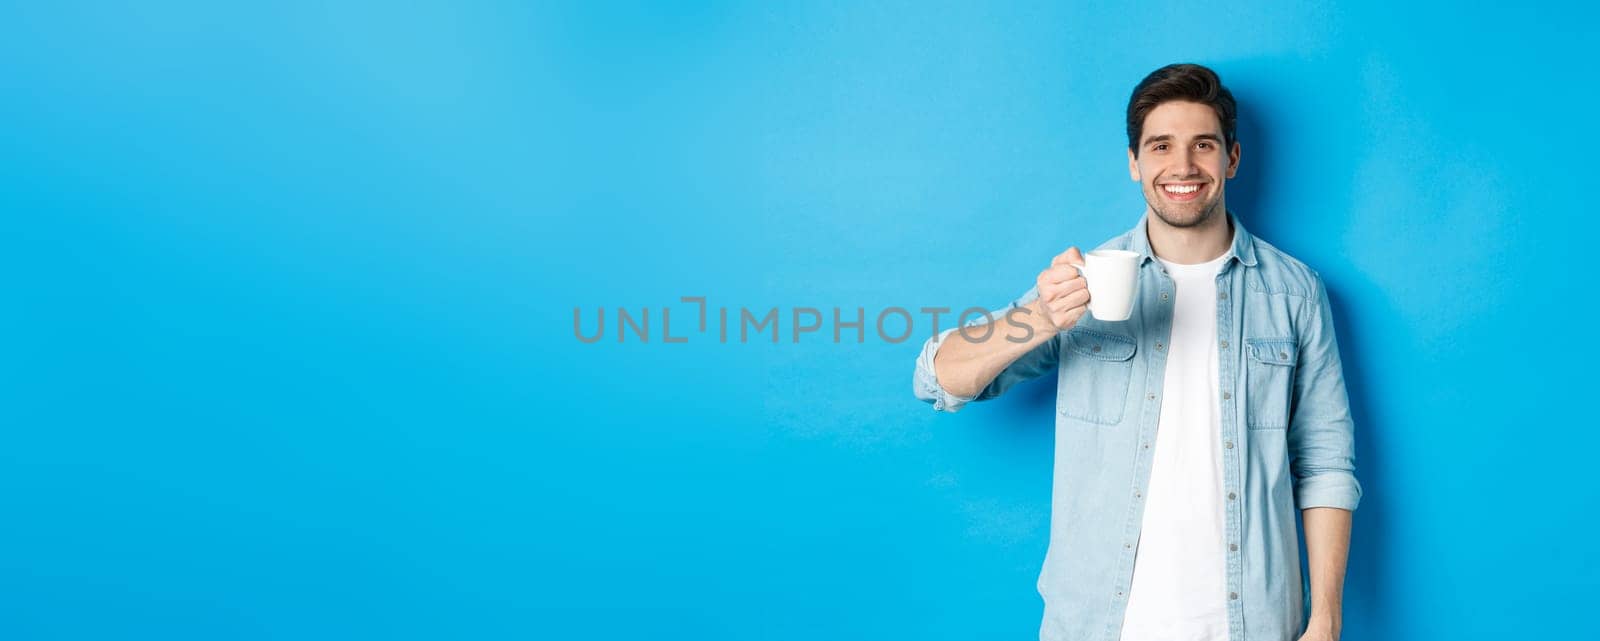 Smiling bearded man holding mug and drinking coffee, standing against blue background.